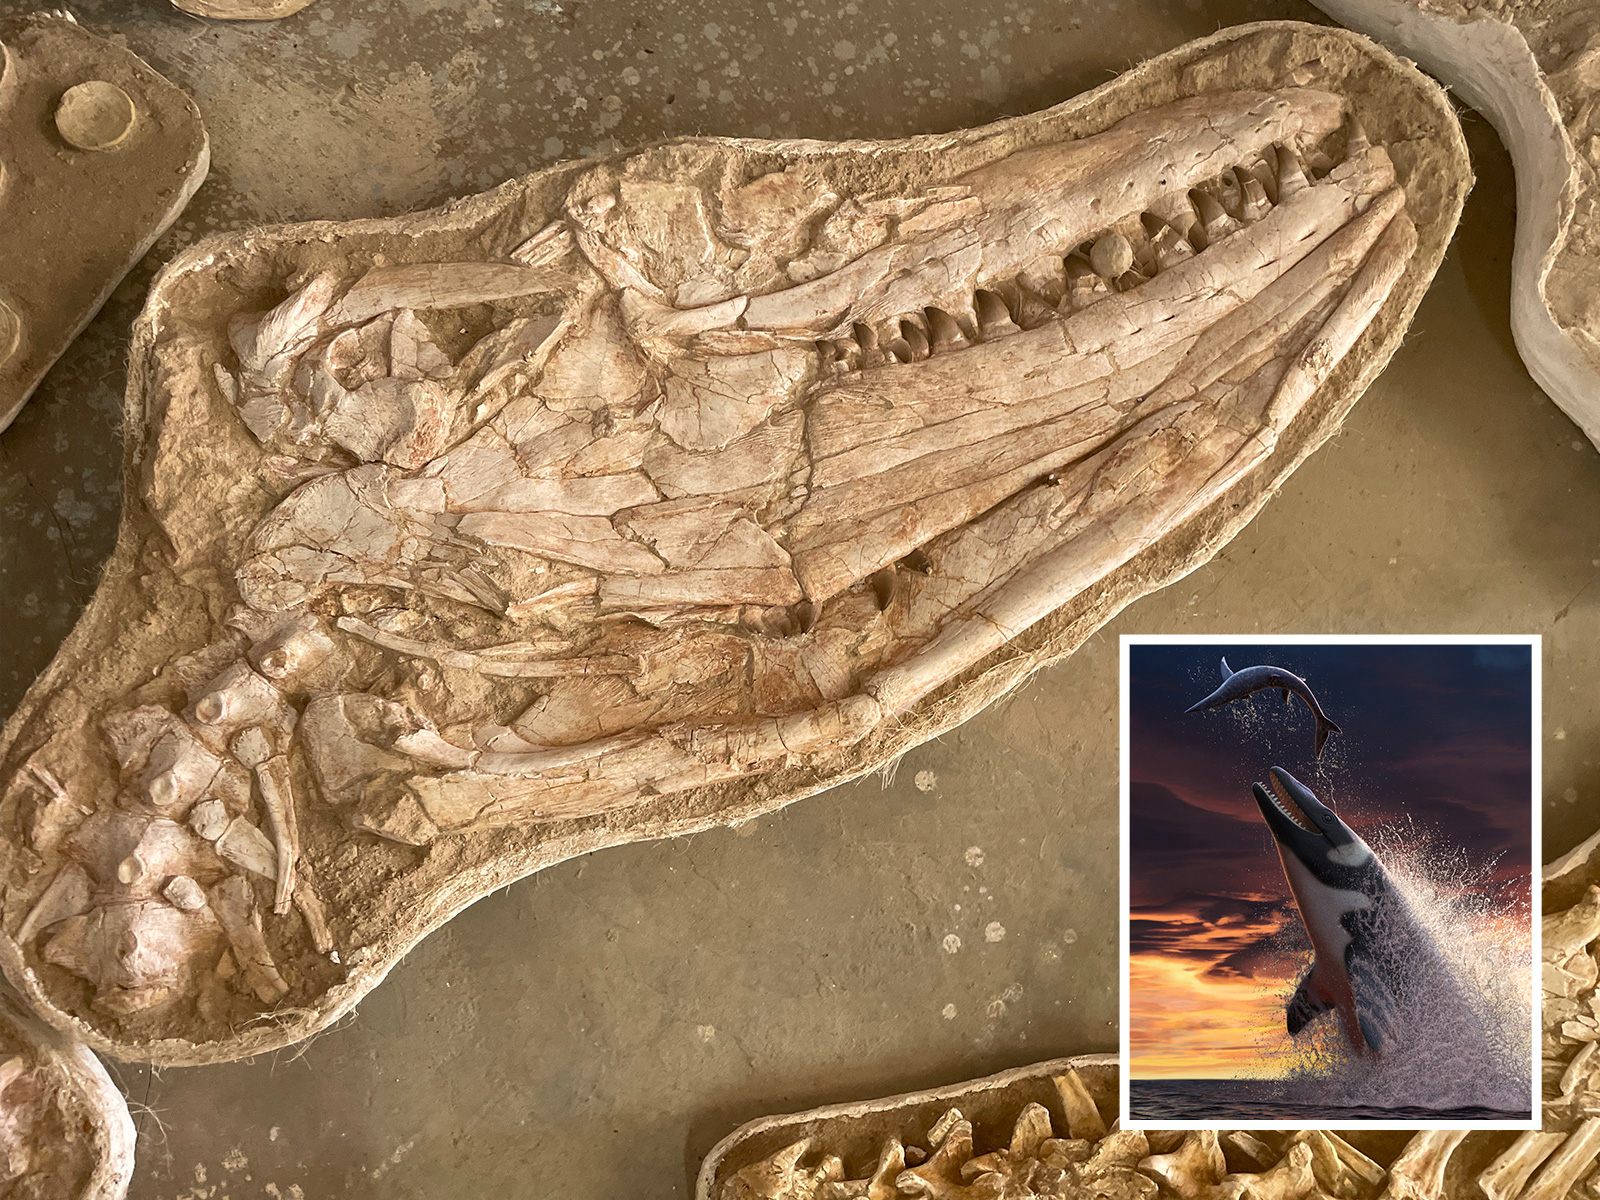 Ancient, Violent Sea Monster Discovered Alongside Its Victims